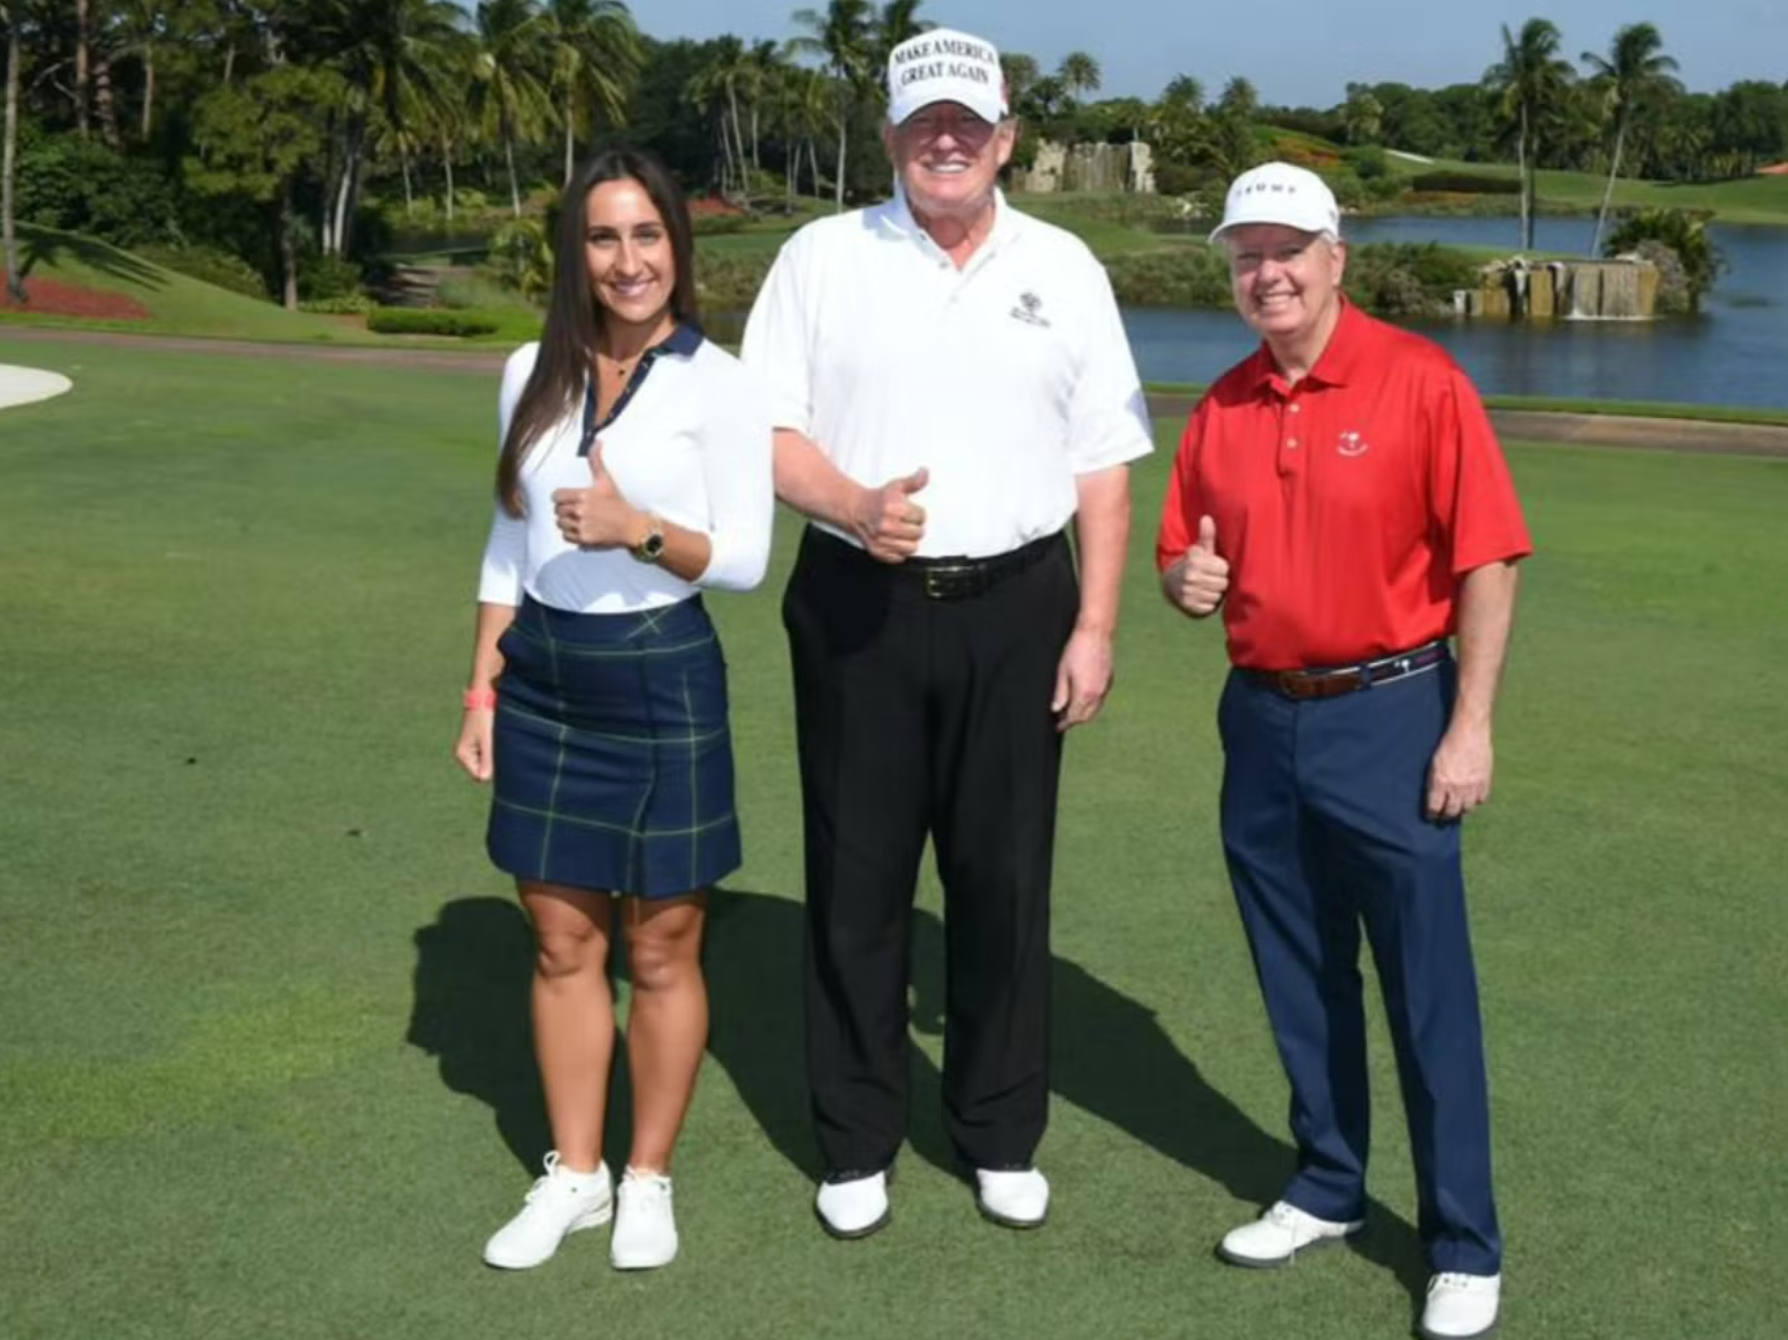 A woman going by the name ‘Anna de Rothschild’ — allegedly an alias used by Ukrainian-born Inna Yashchyshyn — posing with former President Donald Trump and Senator Lindsey Graham at Mar-a-Lago